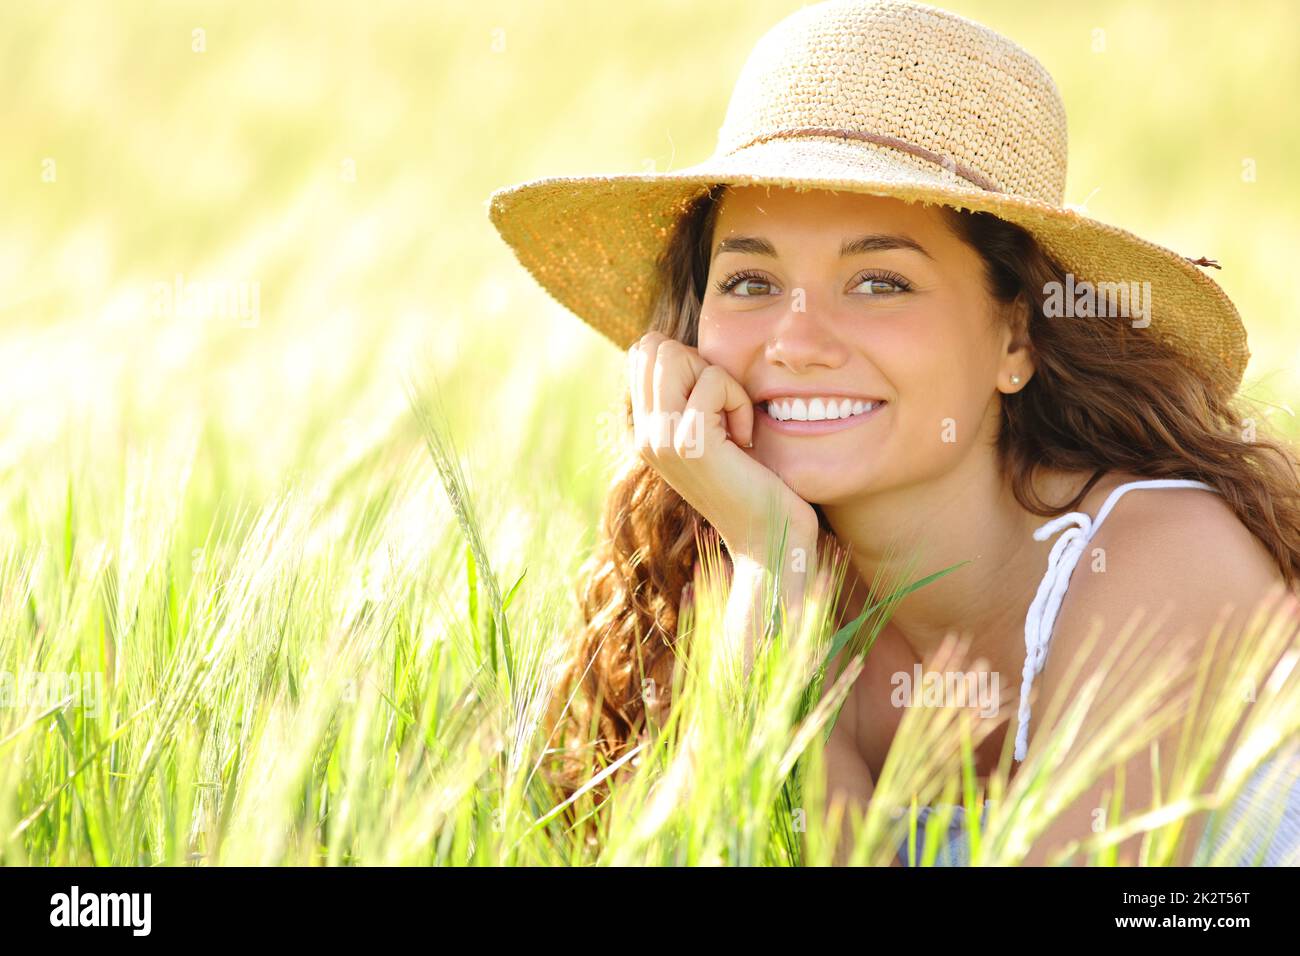 Happy woman with white smile in a field looking at camera Stock Photo